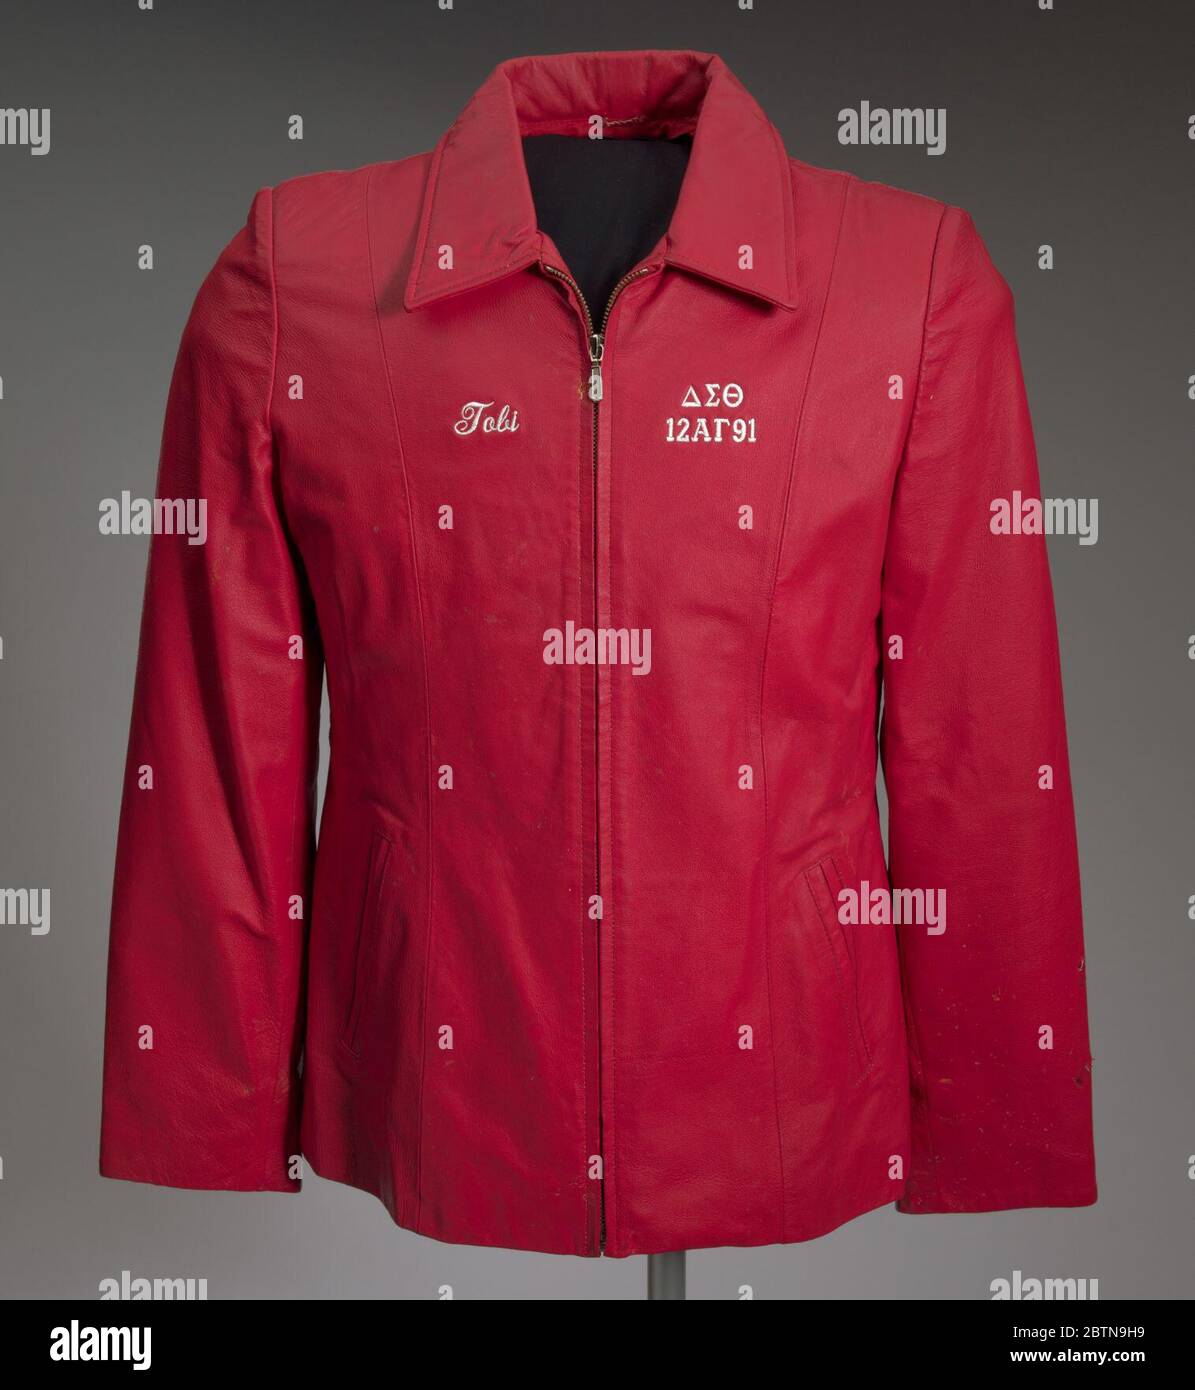 Red leather Delta Sigma Theta jacket owned by Tobi Douglas A Pulley. A red leather Delta Sigma Theta jacket owned and worn by Tobi Douglas A. Pulley. The jacket is constructed of dyed red leather shell and polyester lining. There s a large collar and a zipper down the front. There is white embroidered on the chest of the jacket. Stock Photo